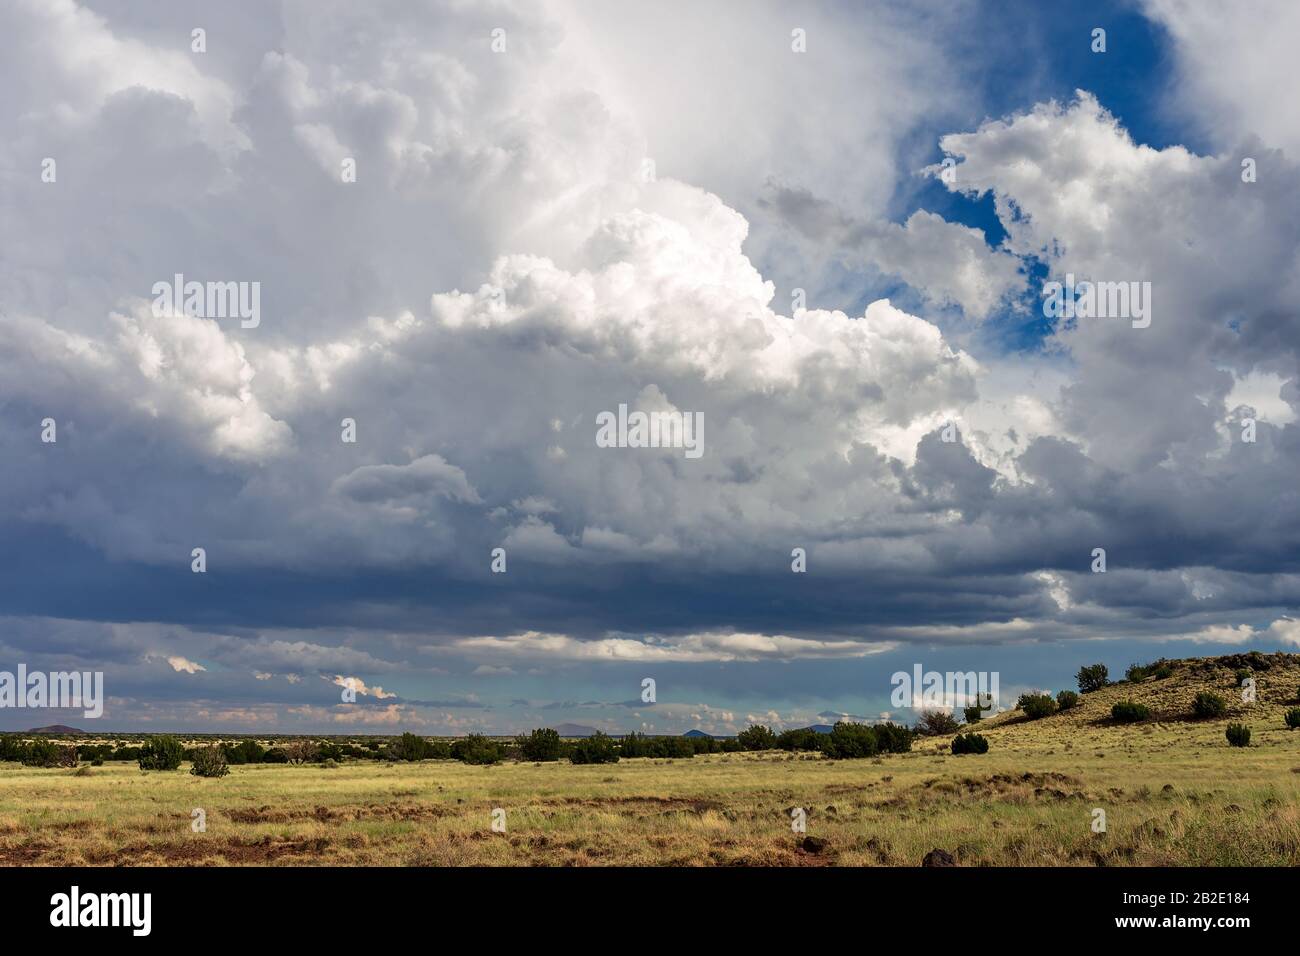 Summer cloudscape with white, billowing cumulonimbus clouds from a developing thunderstorm near Flagstaff, Arizona Stock Photo